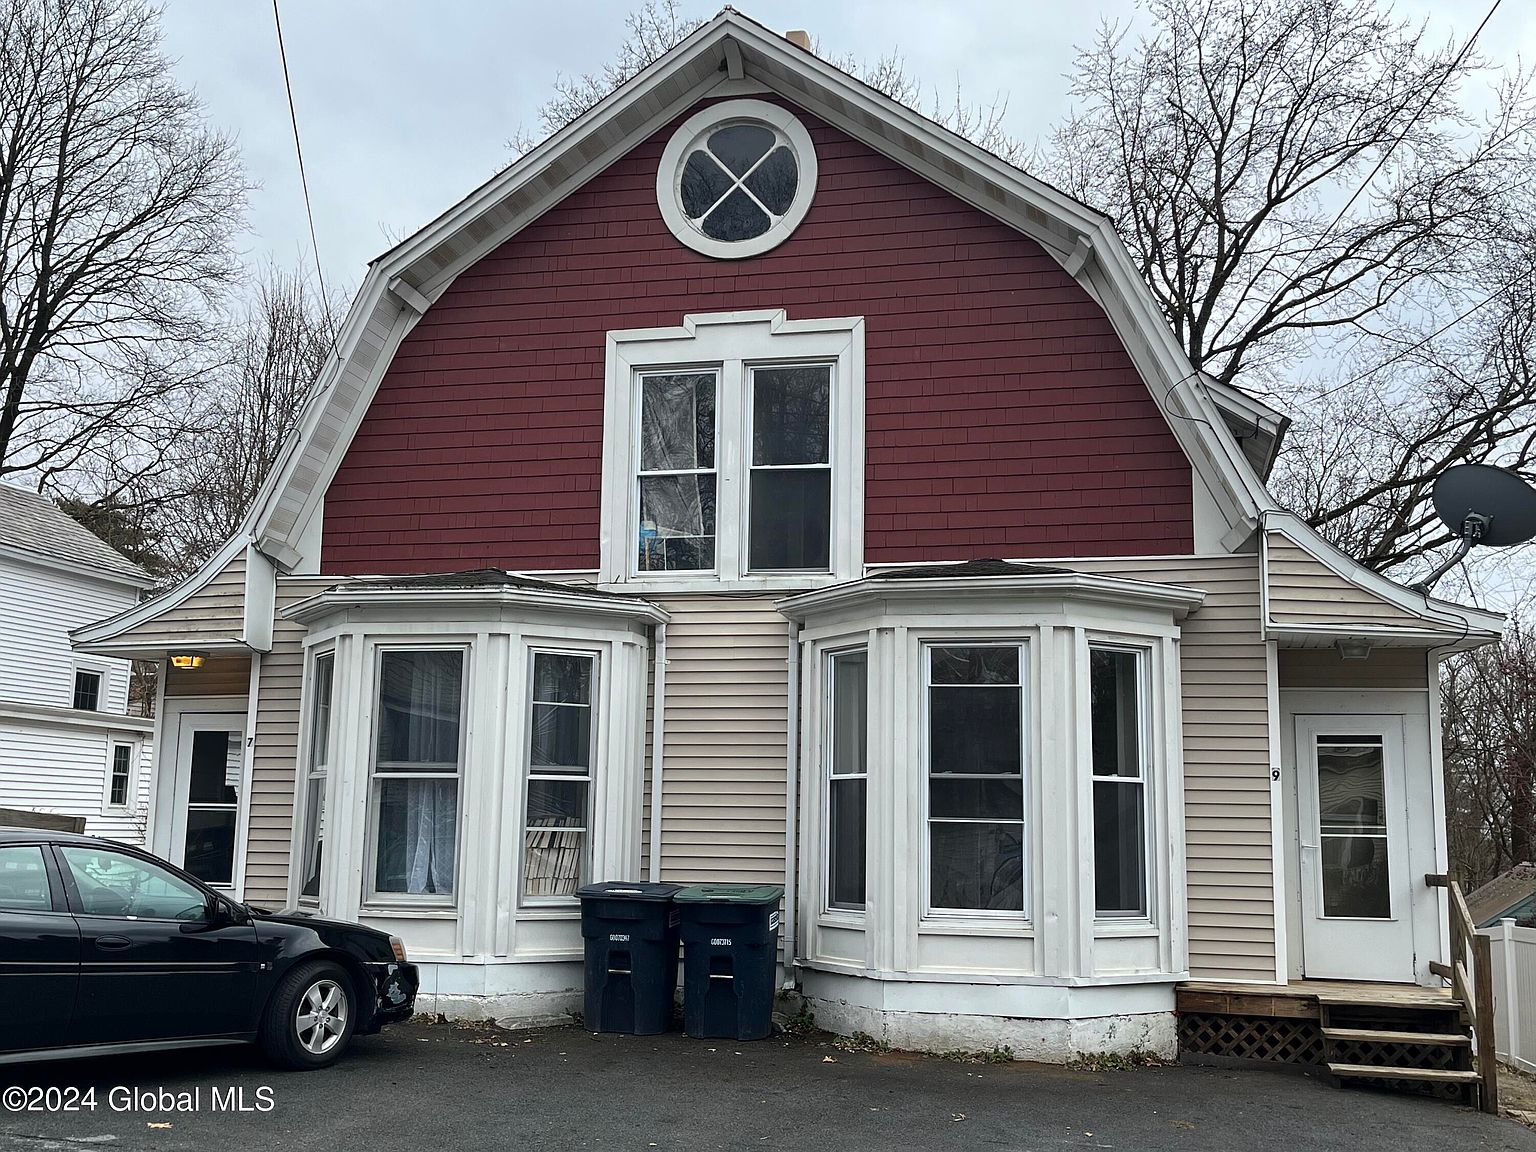 7-9 Marion Street, Fort Edward, NY 12828 | Zillow